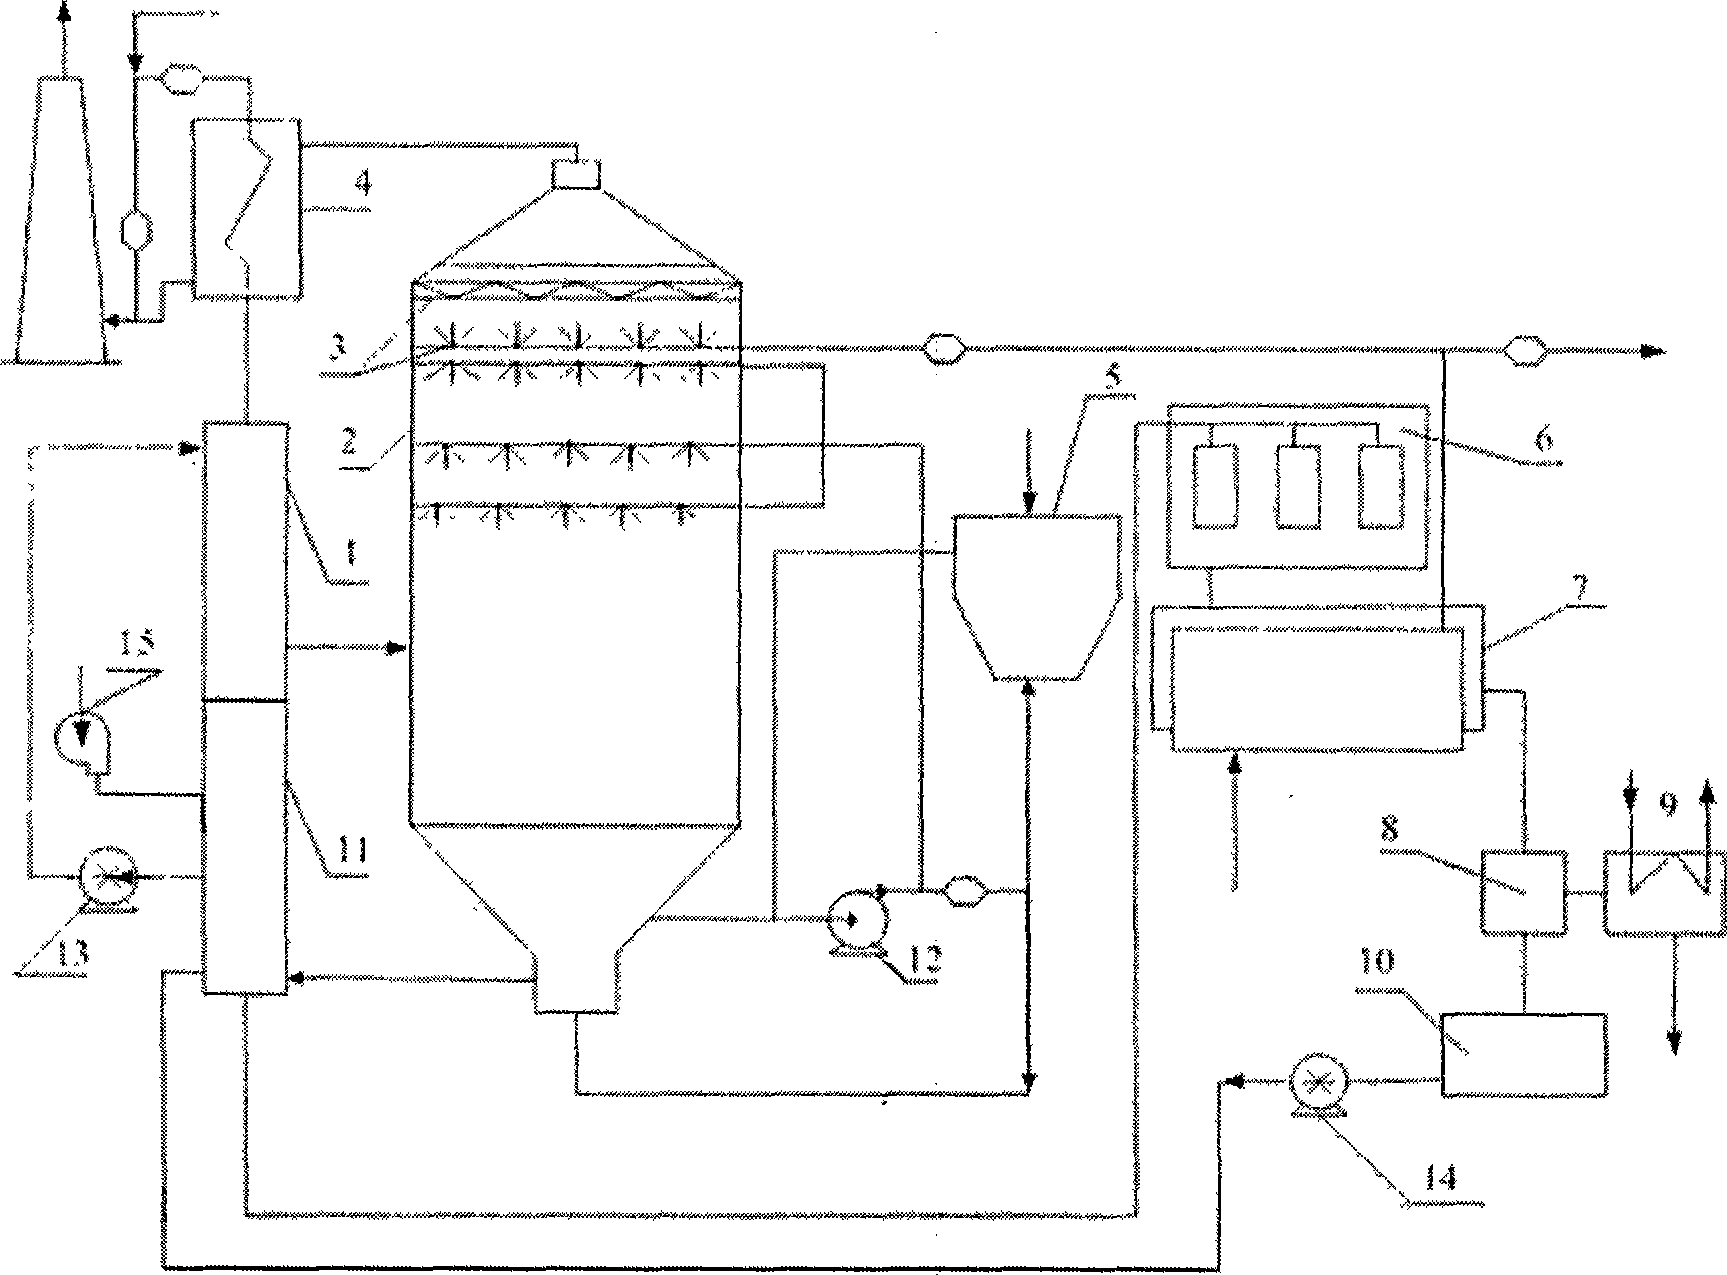 Flue gas desulfurization by magnesia wet method and recovering process of automatic concentration of product